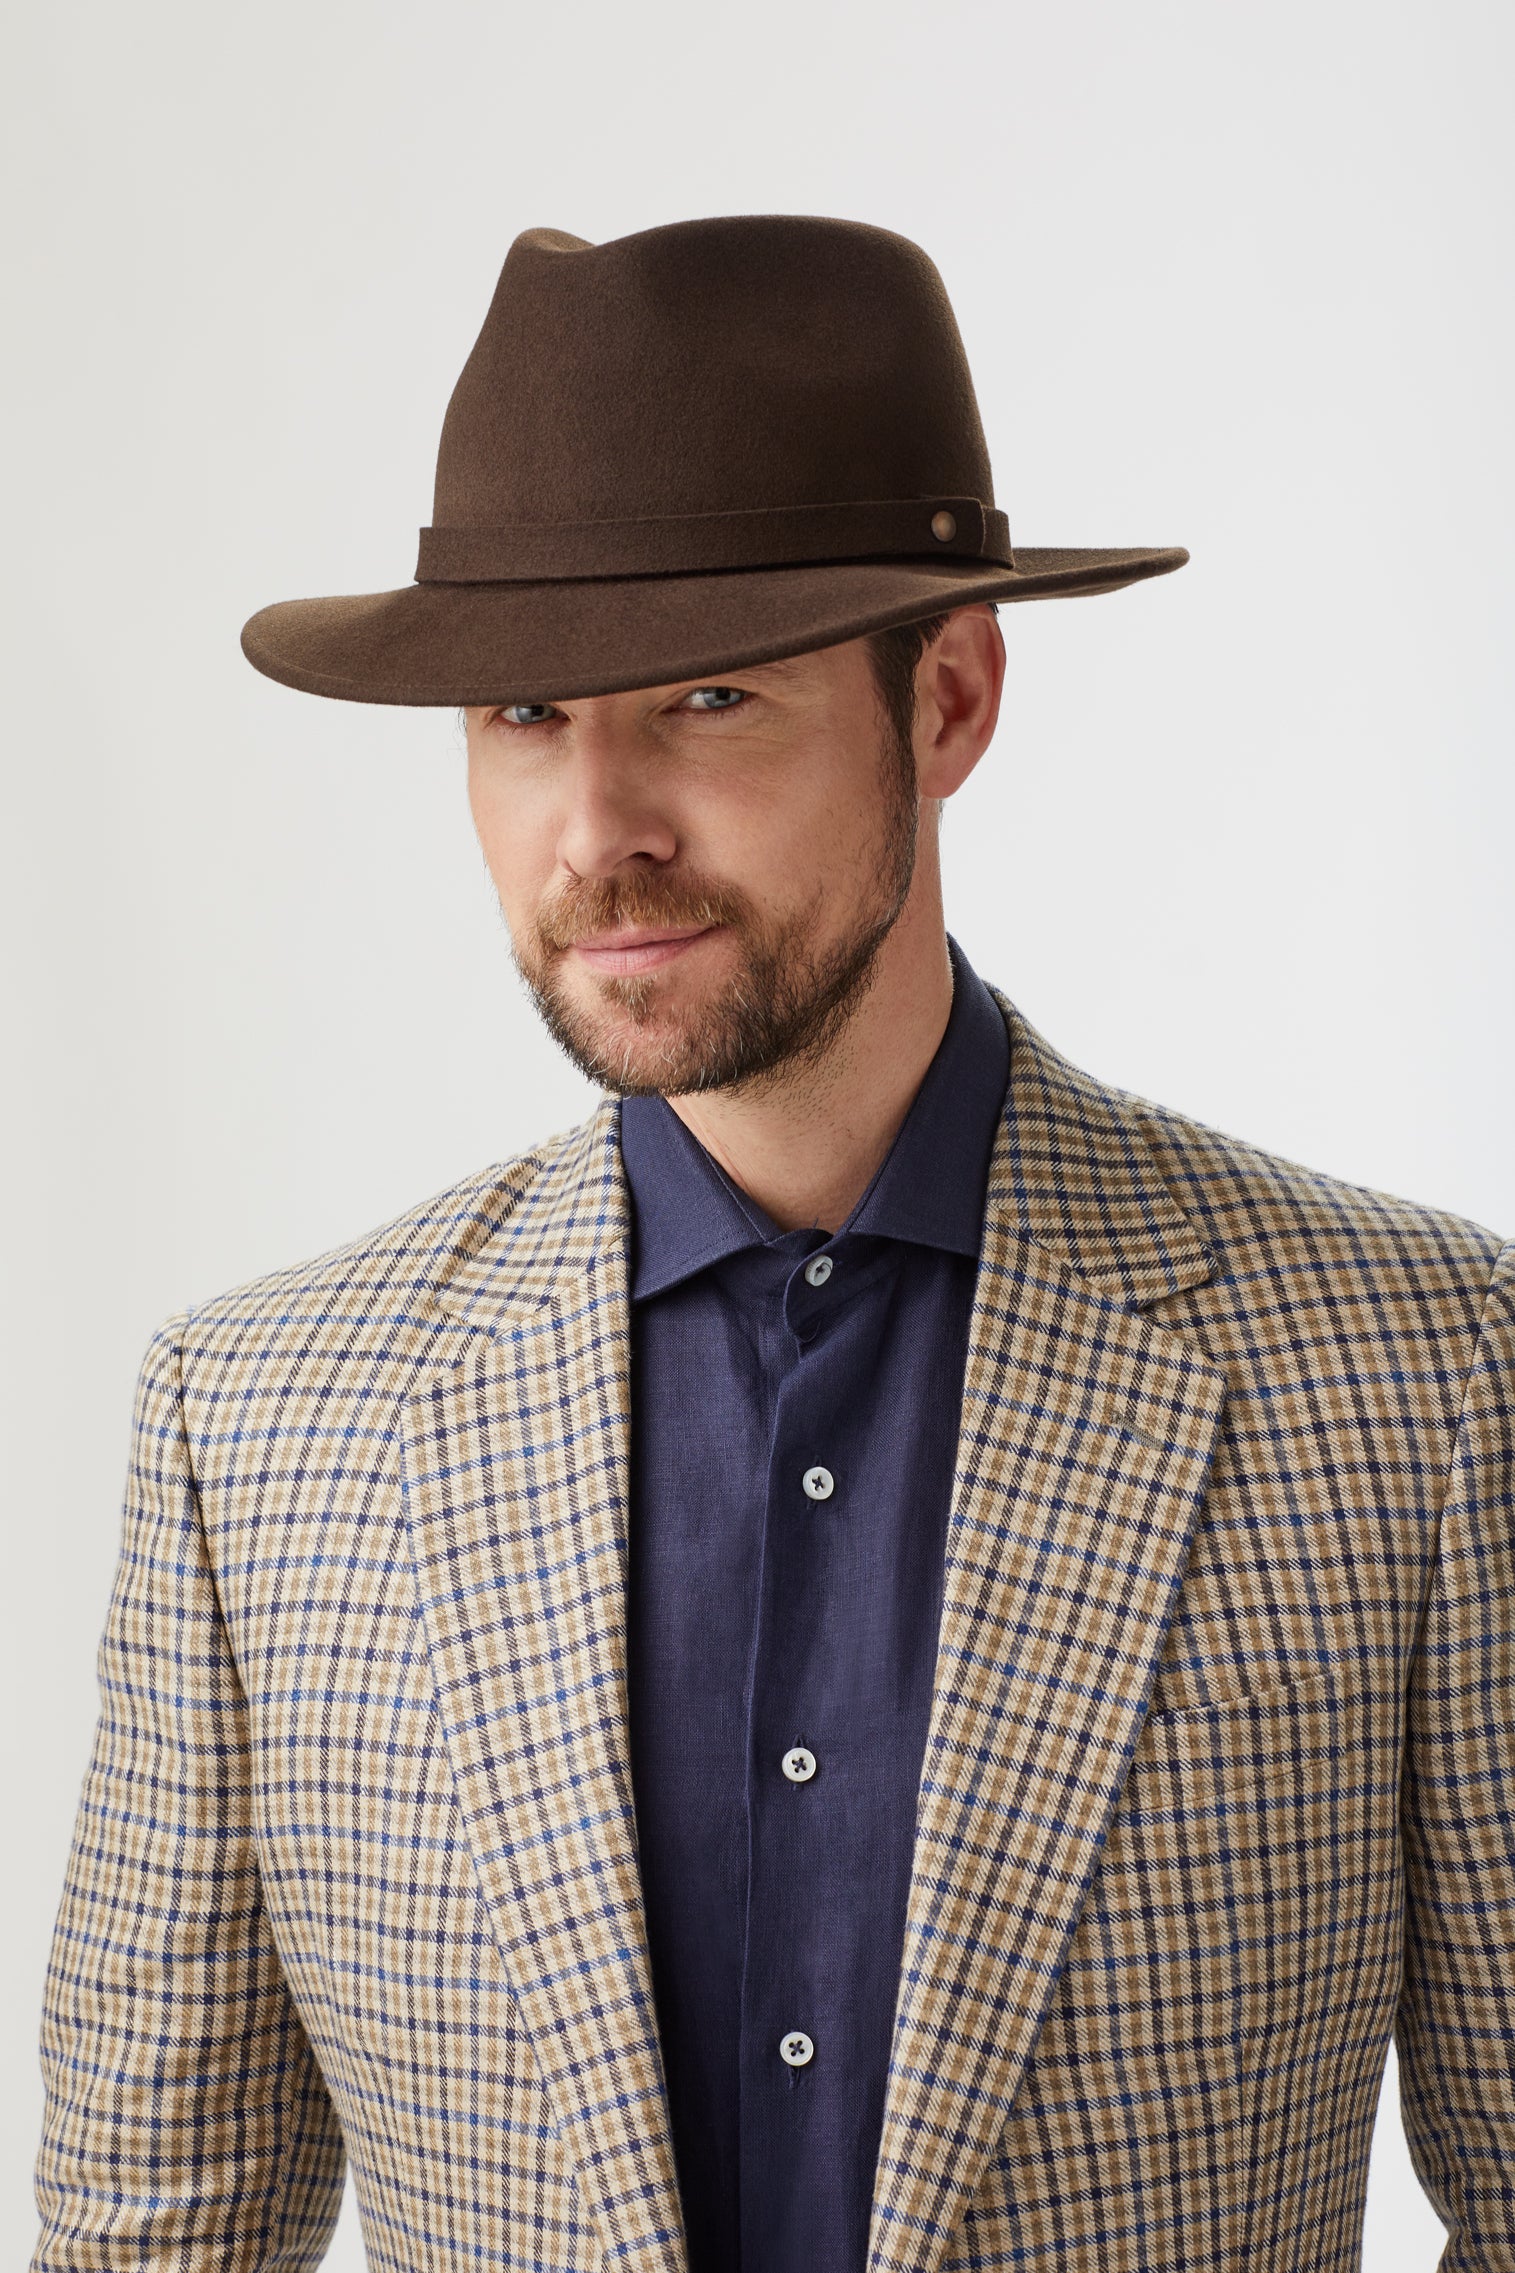 Nomad Rollable Trilby - Products - Lock & Co. Hatters London UK